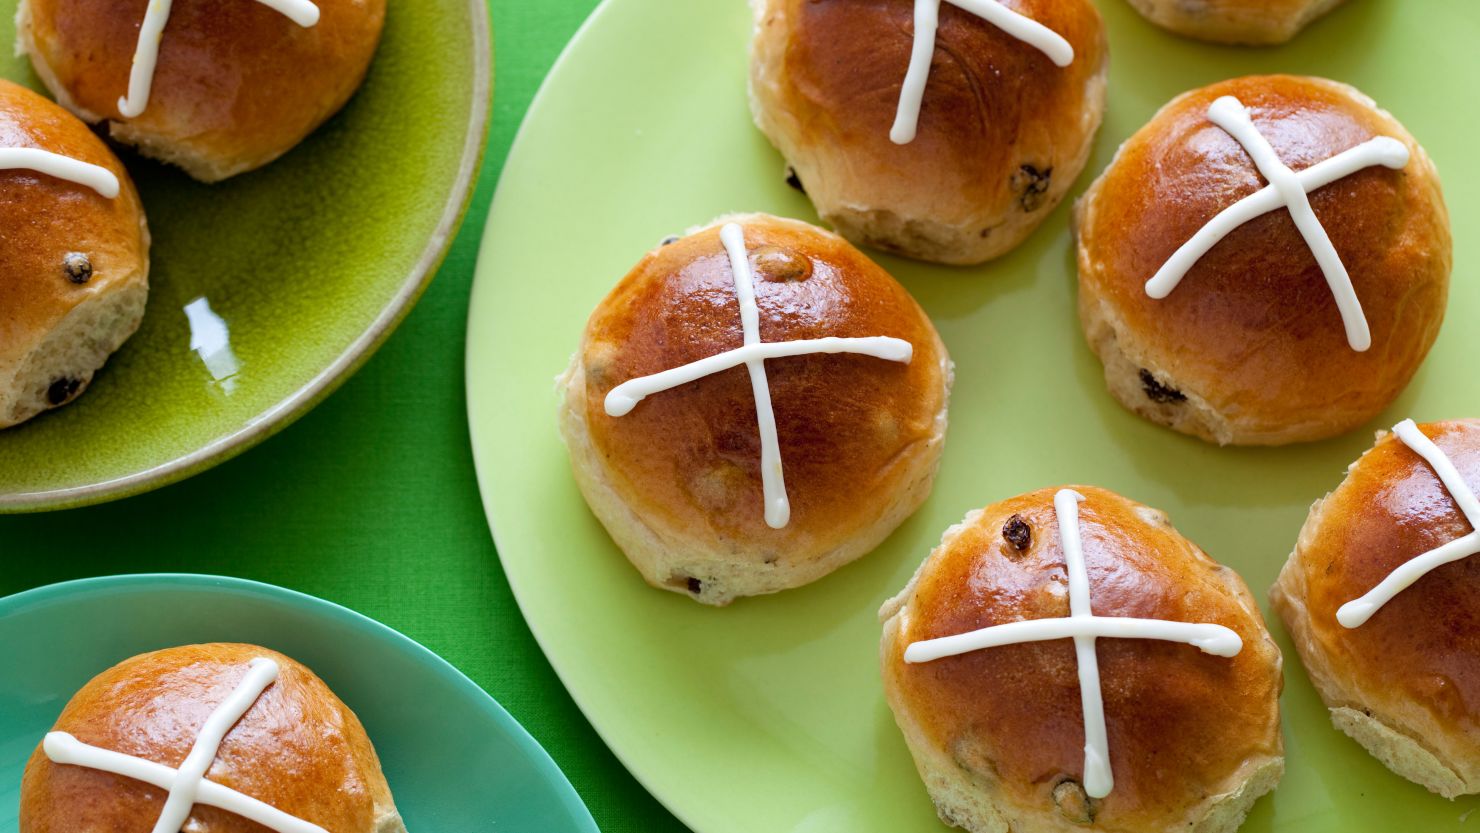 Put a little spring in everyone’s step on Sunday morning with these delicious recipes. We’ve rounded up our favorite buns, frittatas, pancakes and more.